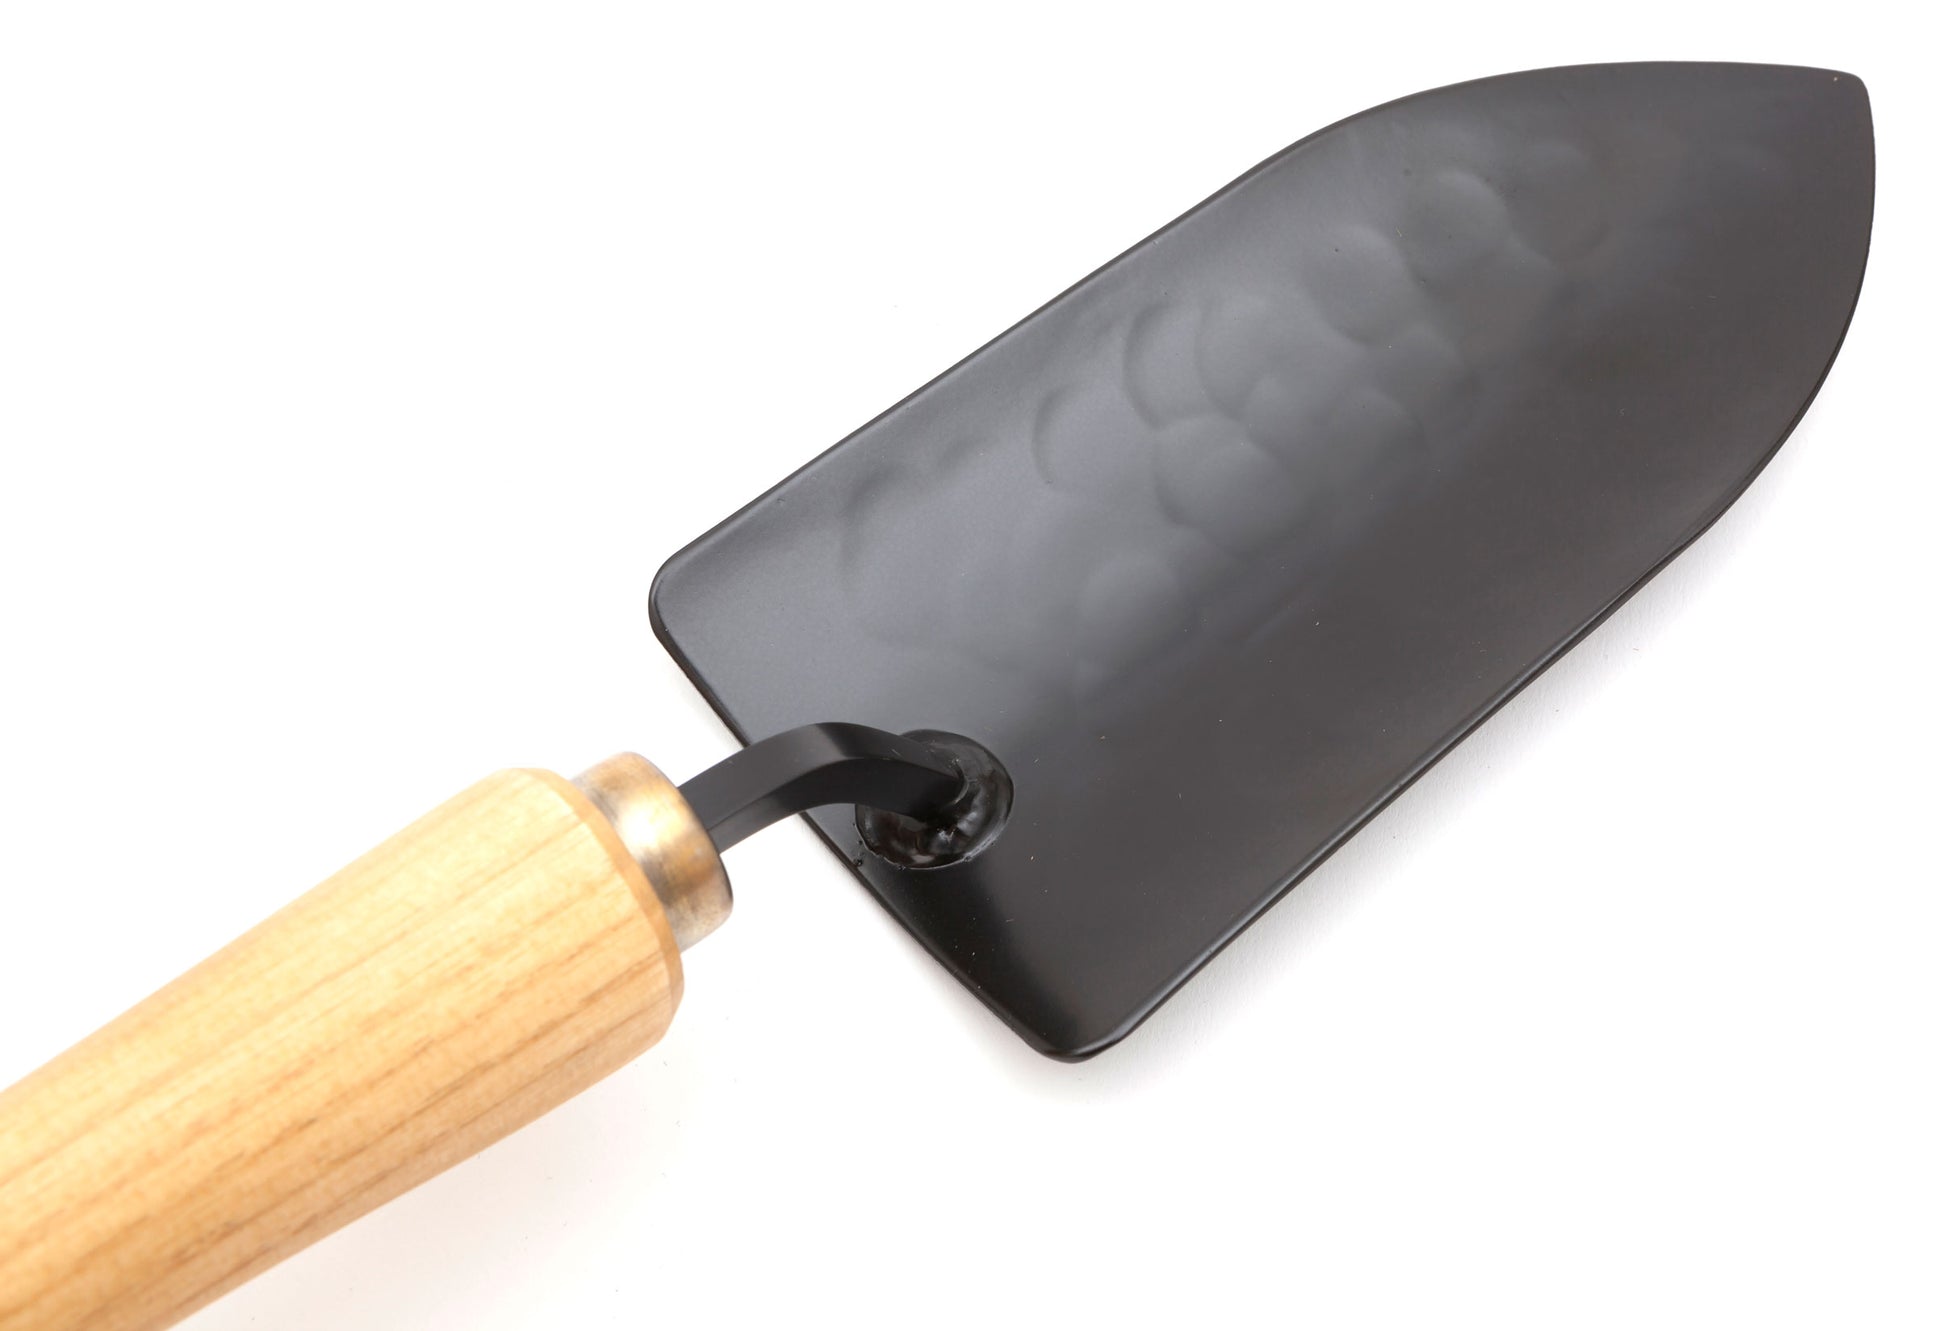 Garden trowel with ash handle and durable composition from Japanese gardenwear experts Niwaki. 